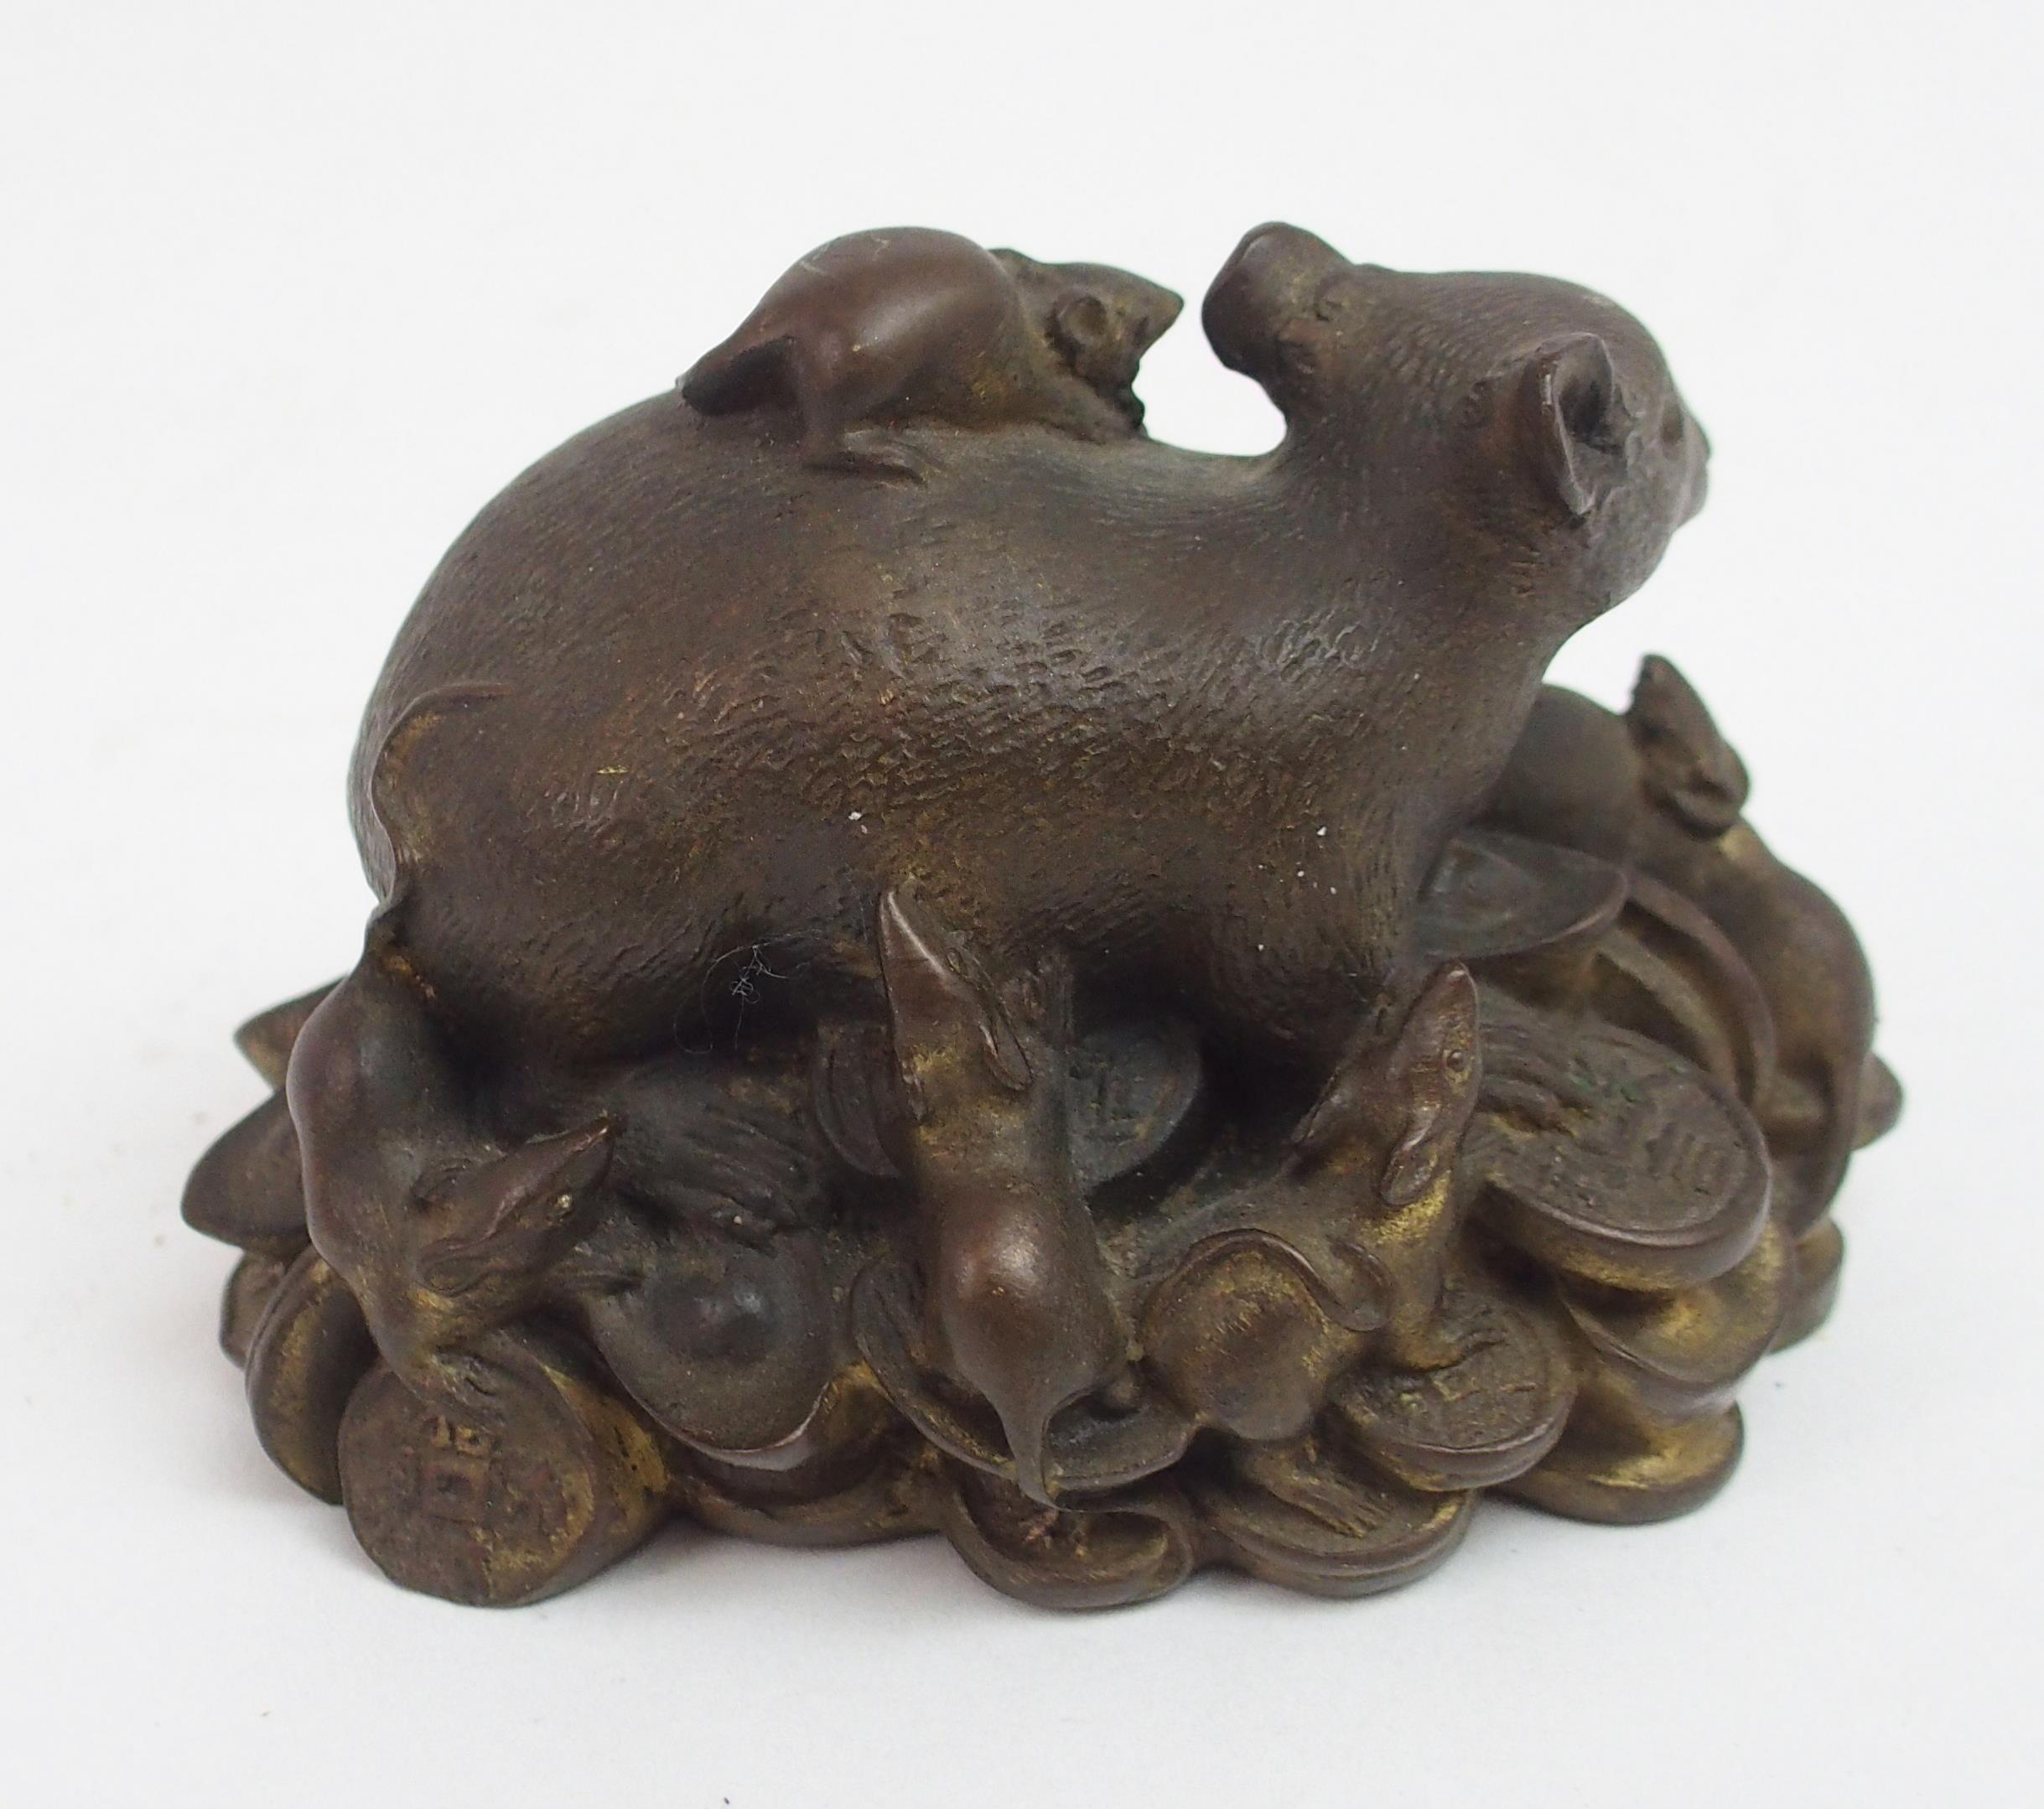 A CHINESE BRONZE FIGURE OF A RECUMBENT RAT modelled seated on a pile of archaic coins, surrounded by - Image 3 of 5